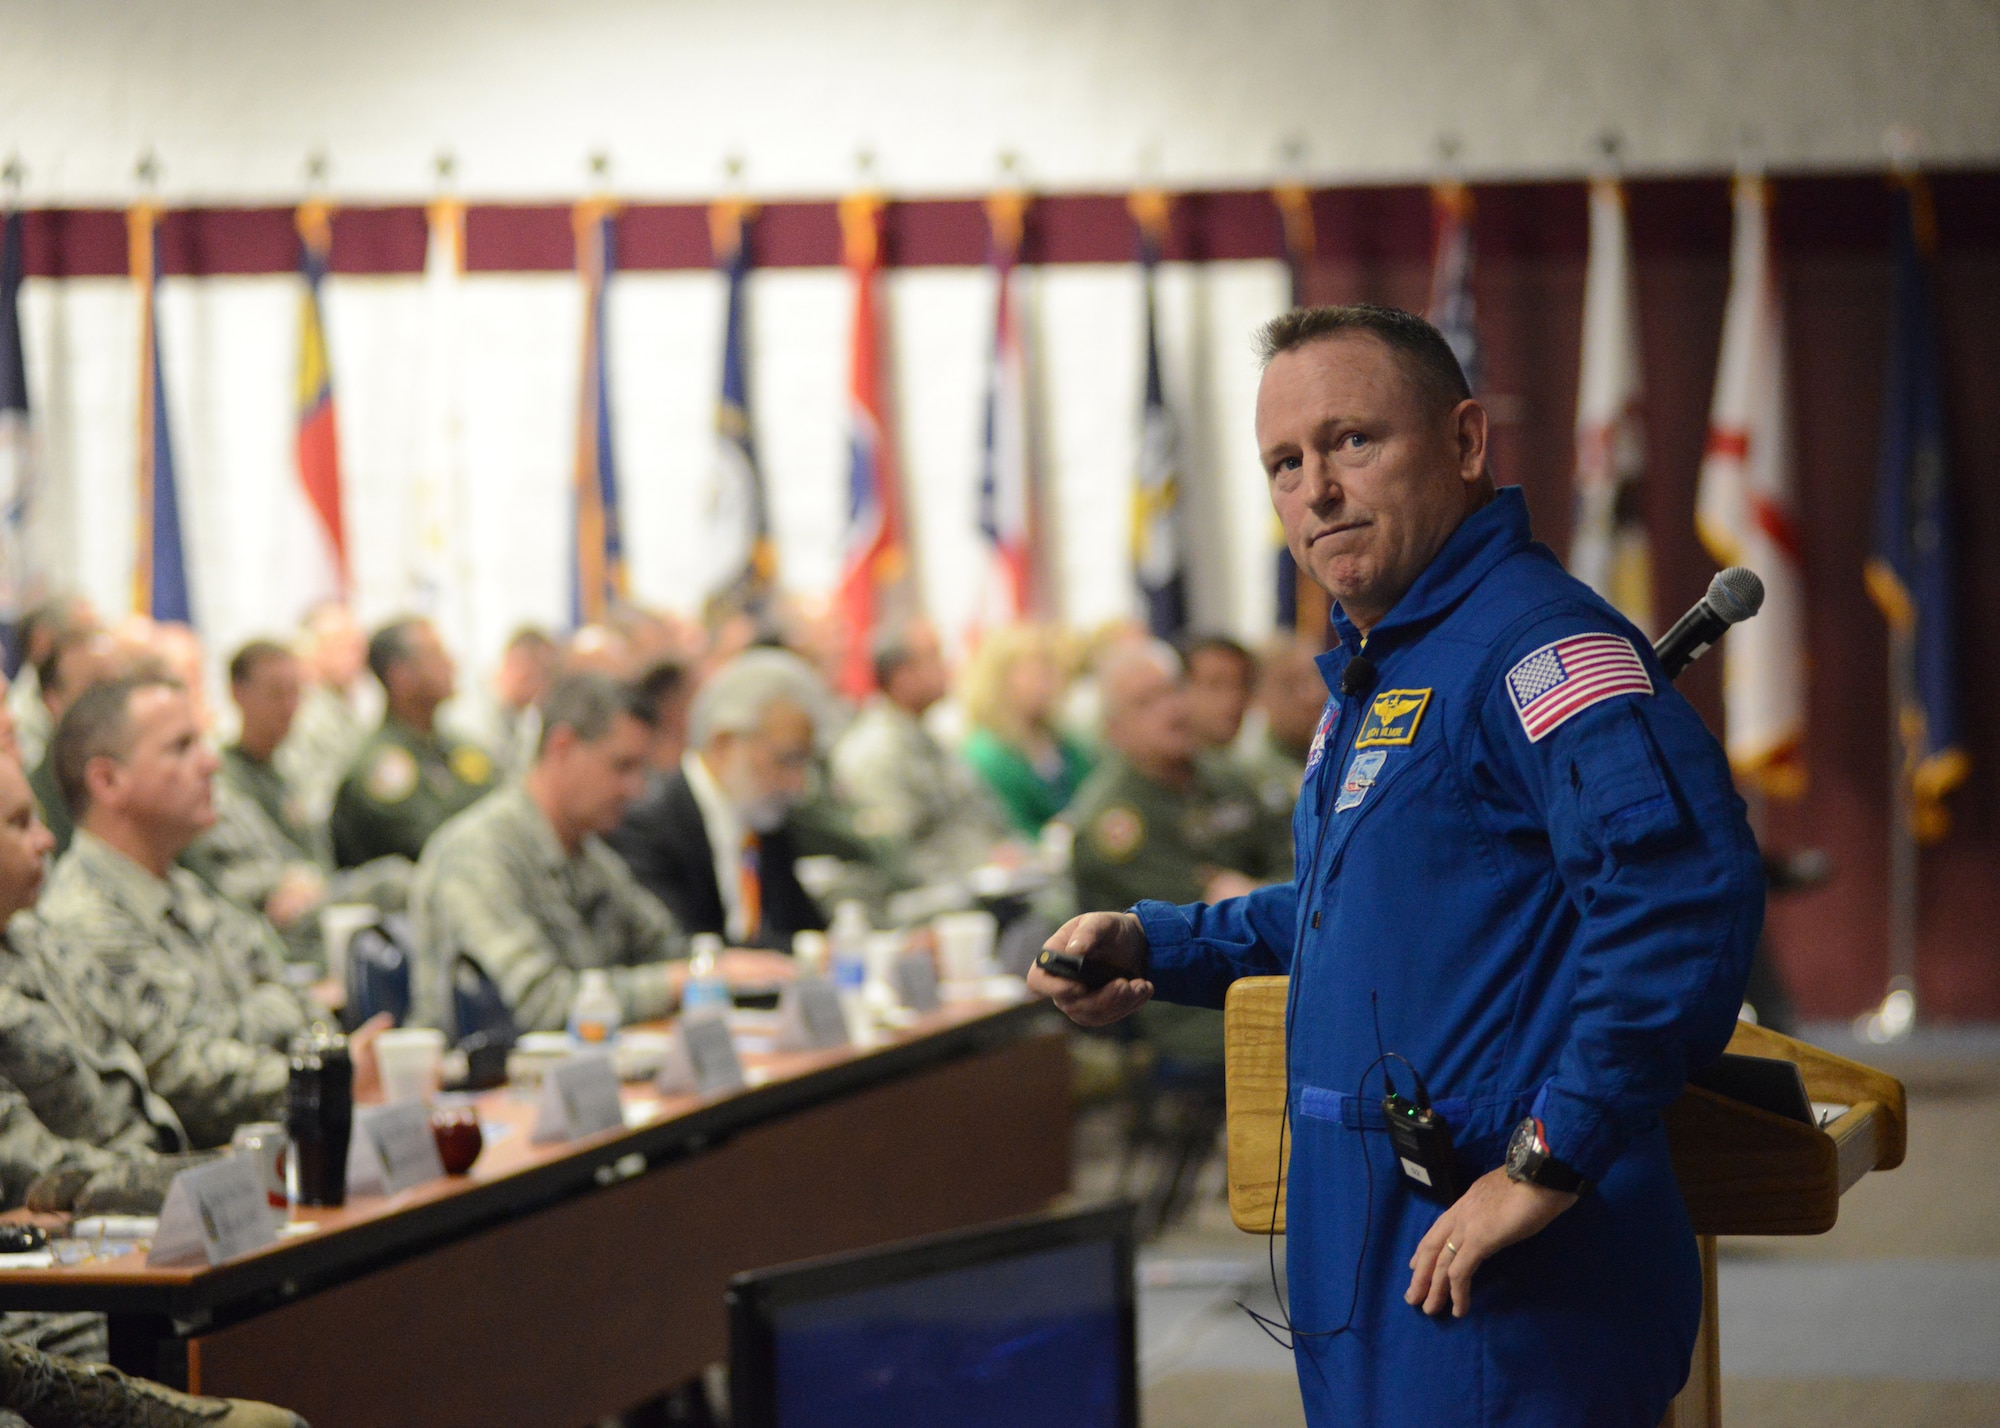 NASA astronaut and US Navy Capt. Barry E. Wilmore talks about his experiences as commander of the International Space Station at the 2015 Air National Guard Executive Safety Summit at Volk Field Combat Readiness Training Center, Wisconsin, May 6, 2015. The conference covers a wide range of topics for ANG senior leaders including safety, resilience, mishap prevention and training. (US Air National Guard photo by Staff Sgt. John E. Hillier/RELEASED)